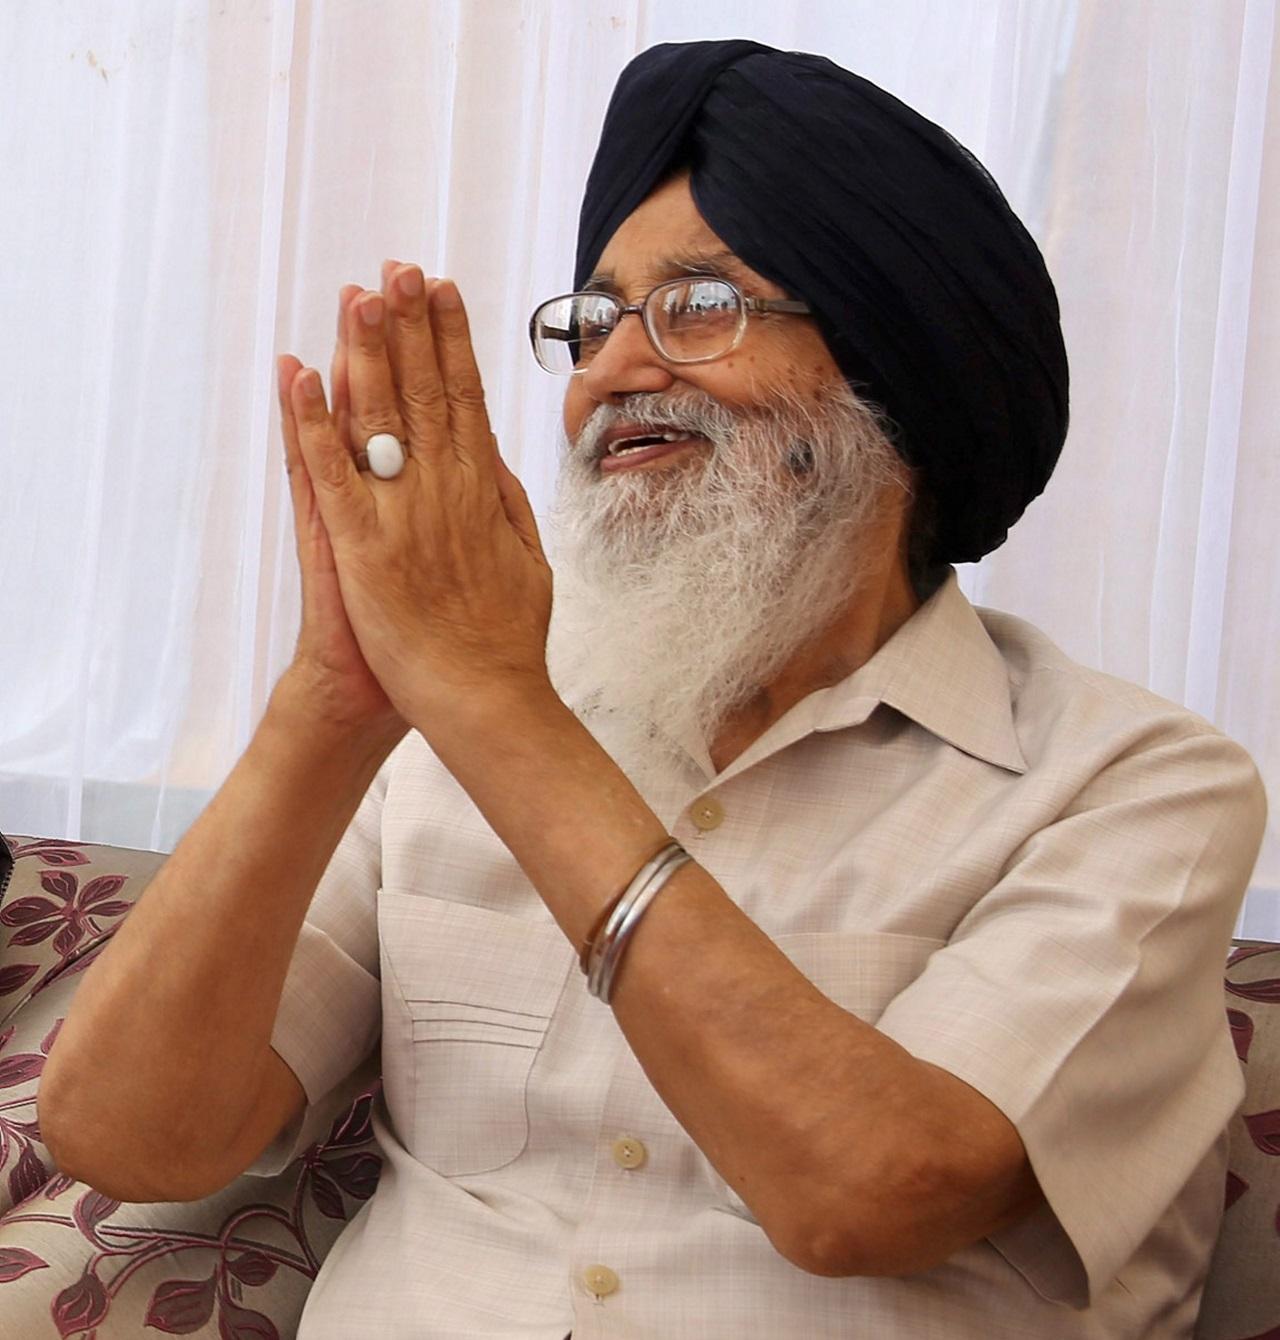 In 2008, Badal handed over the reins of the SAD, which he had headed from 1995, to son Sukhbir Singh Badal, who also became the deputy chief minister under him